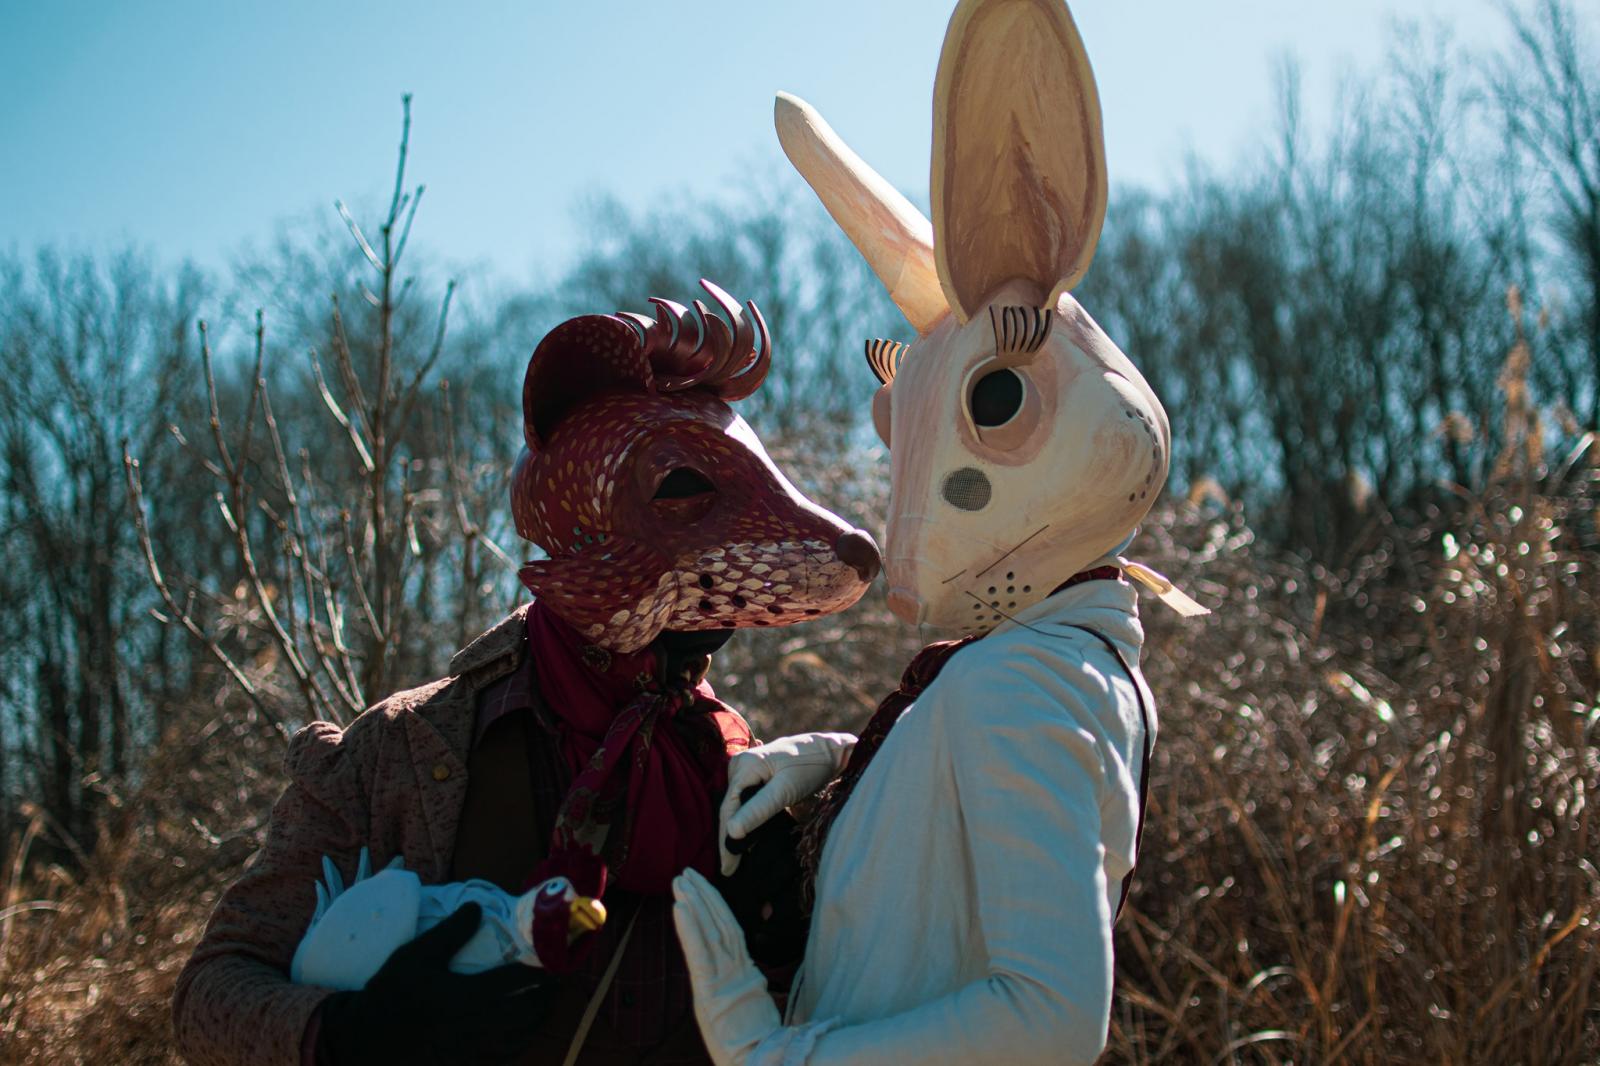 These masks were created using a flat patterning technique for a Spring Equinox parade with Happenstance Theater in 2021.